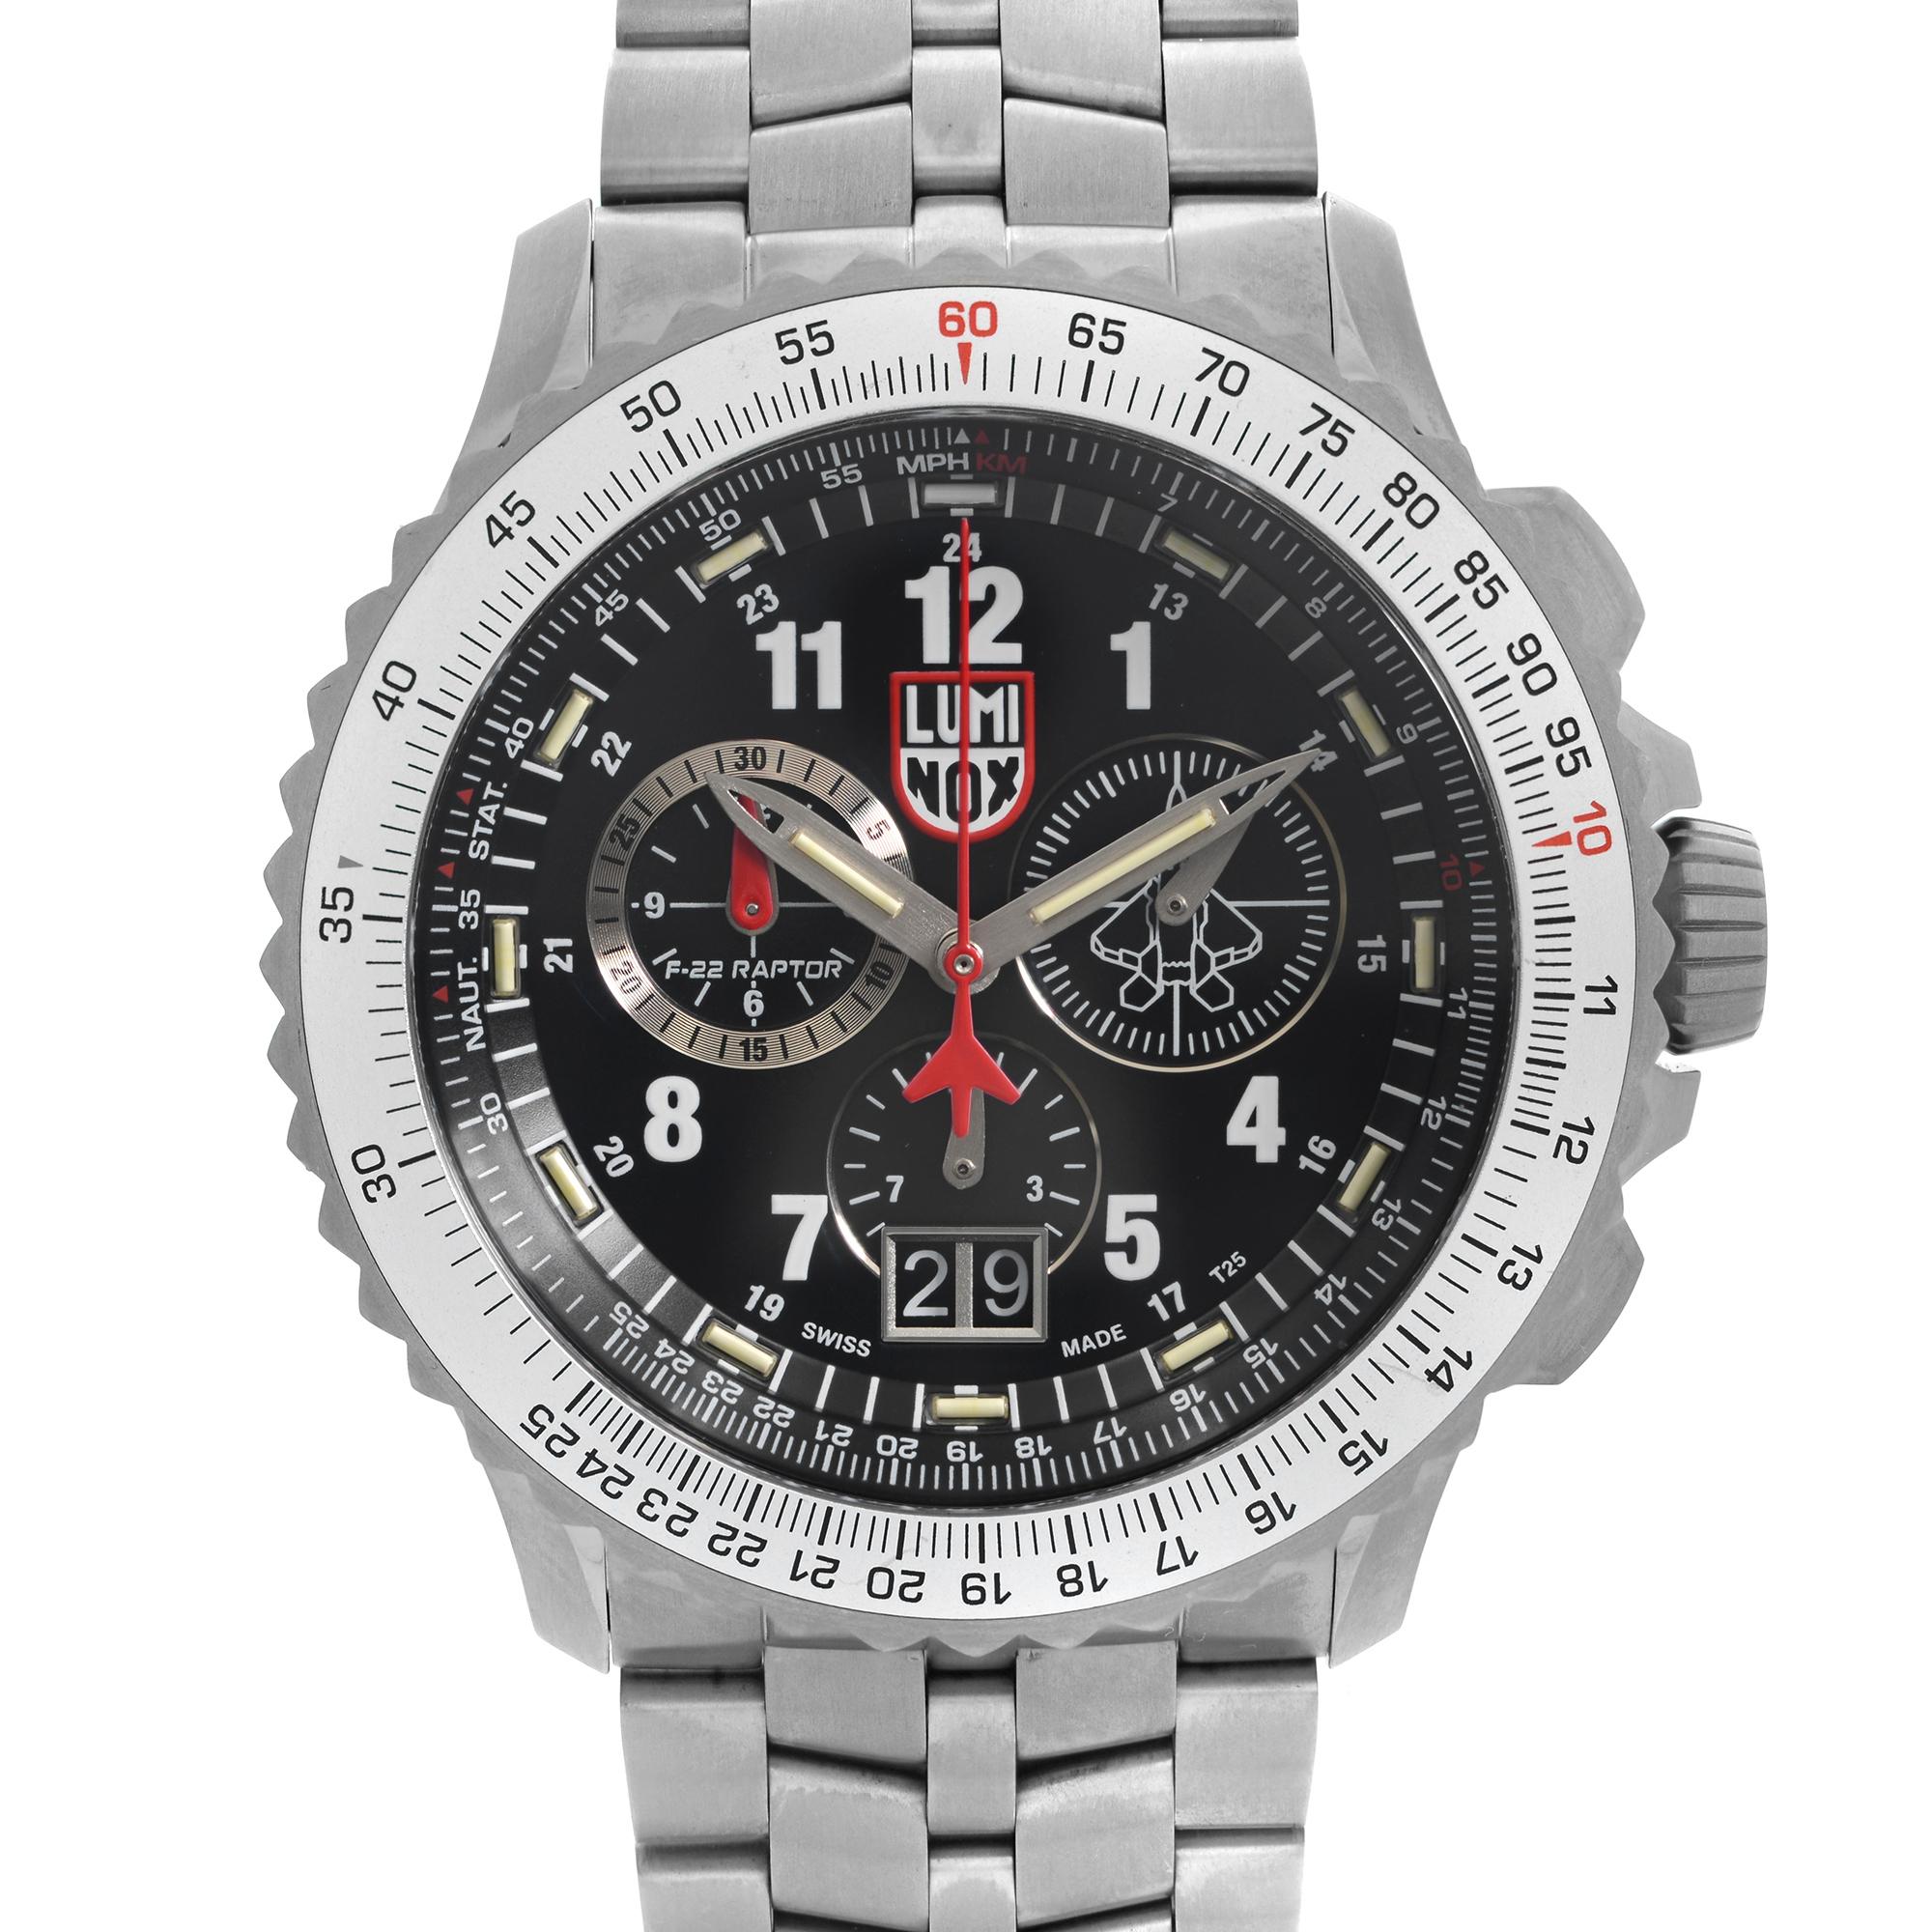 Unworn Luminox F-22 Raptor Men's Watch 9241.M. This Timepiece is powered by Quartz (battery) movement with features: Titanium case and bracelet. Bi-directional rotating bezel with Tachymeter markings. Black Dial with Silver-tone luminous hands and